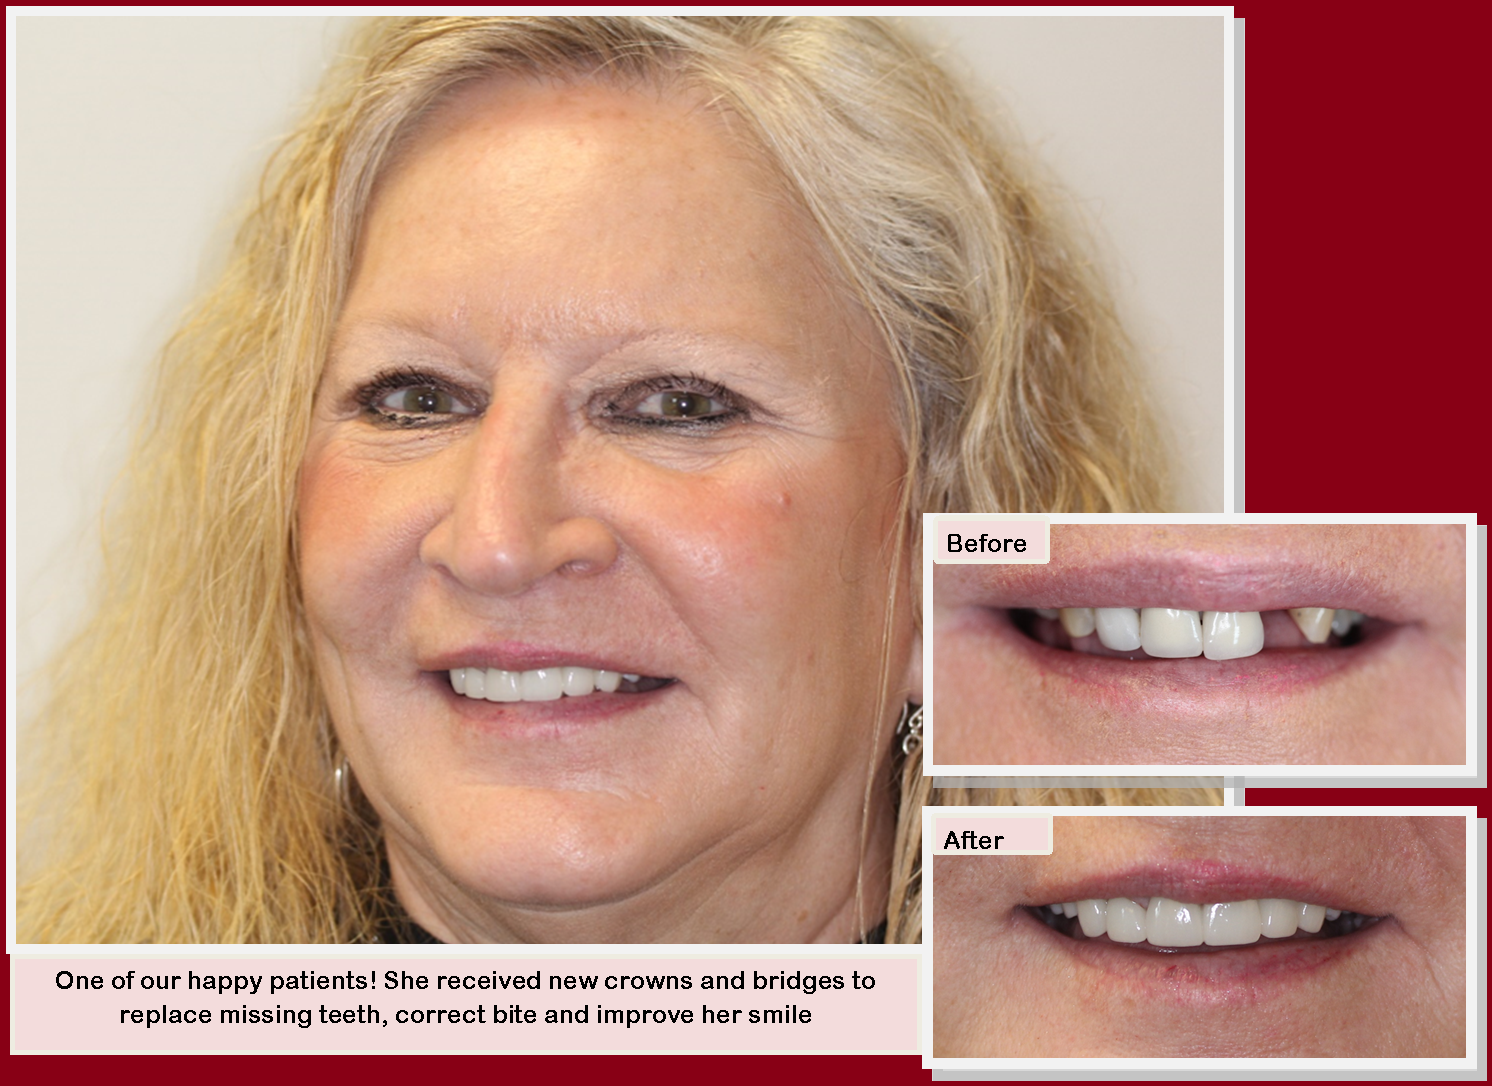 New crowns and bridges to replace missing teeth